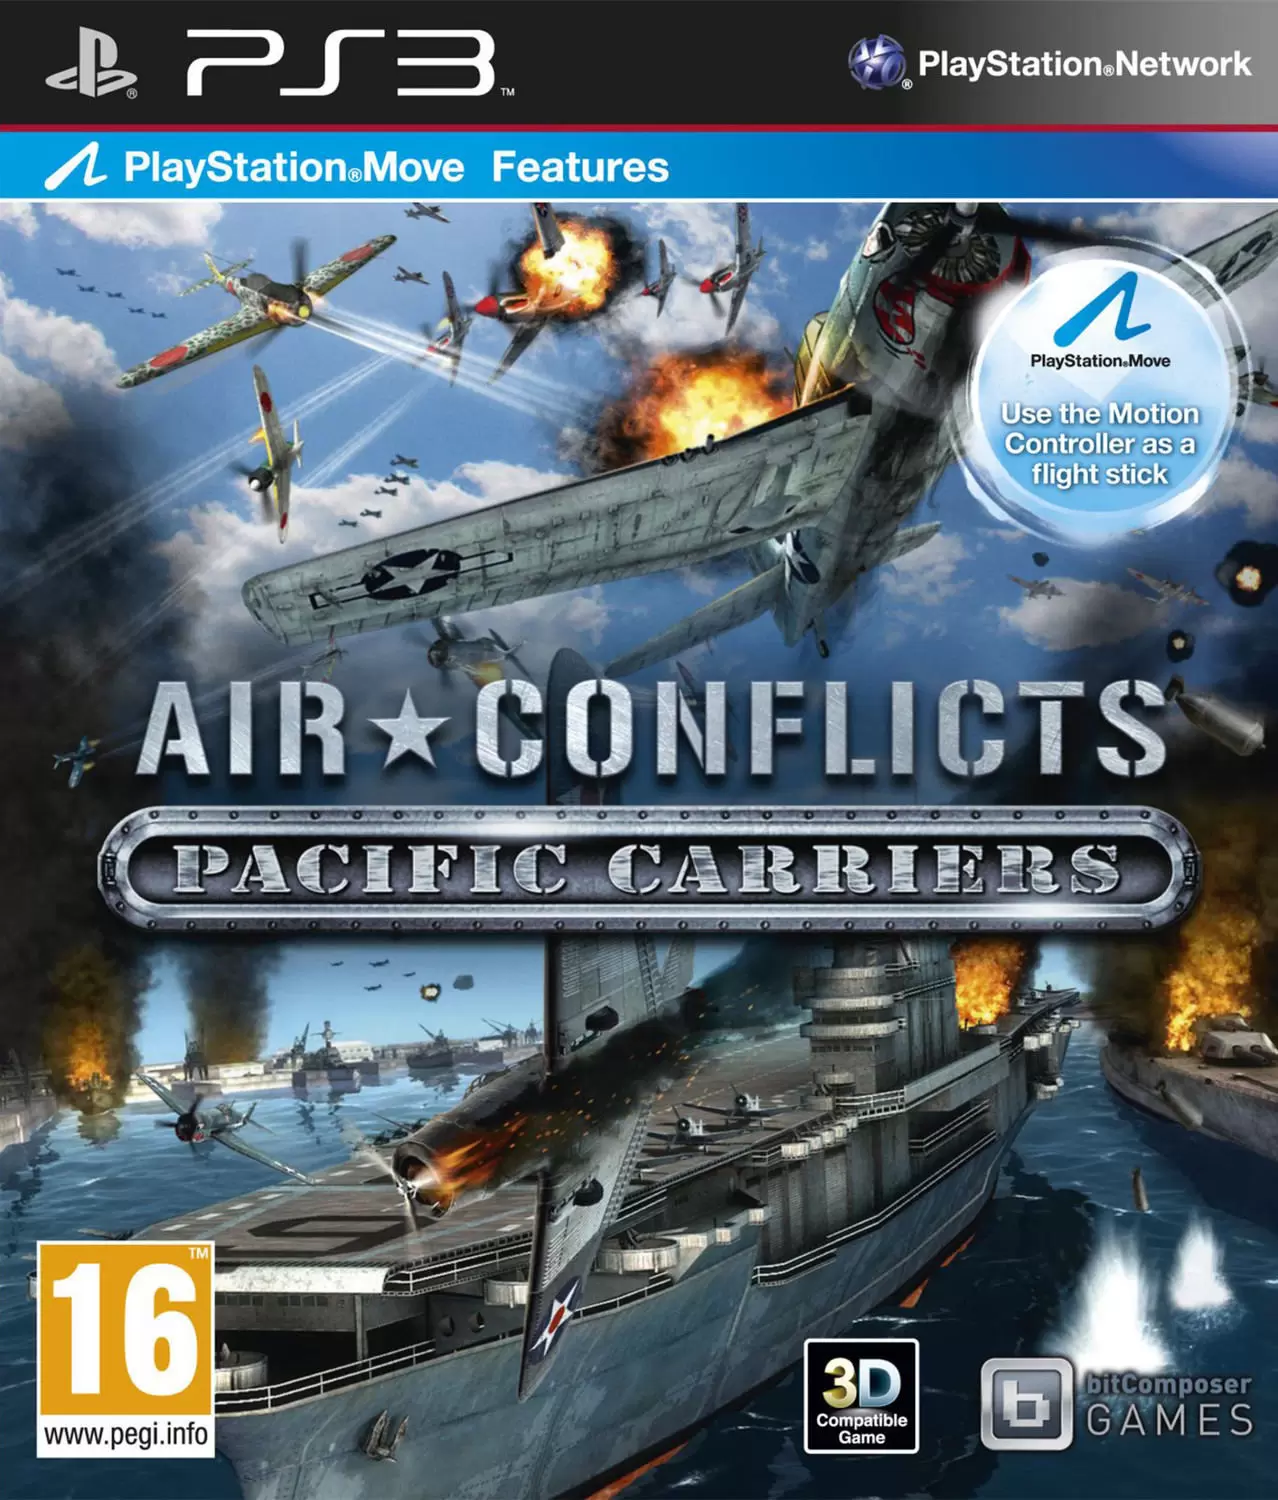 PS3 Games - Air Conflicts: Pacific Carriers